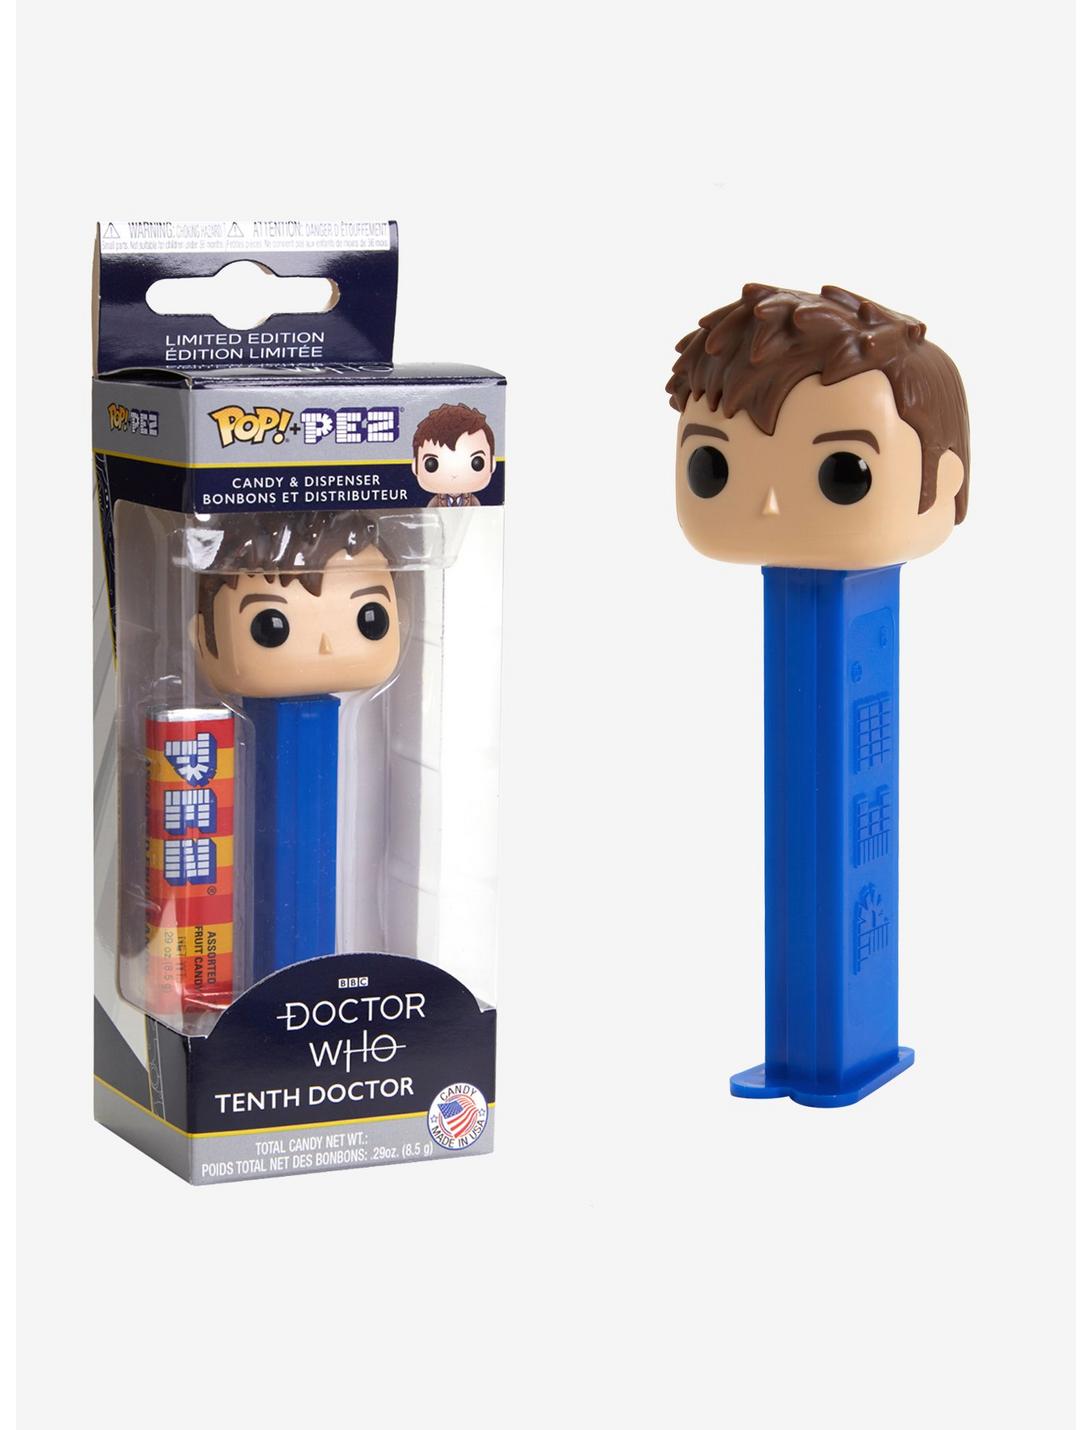 Funko Pop! PEZ Doctor Who Tenth Doctor Candy & Dispenser, , hi-res